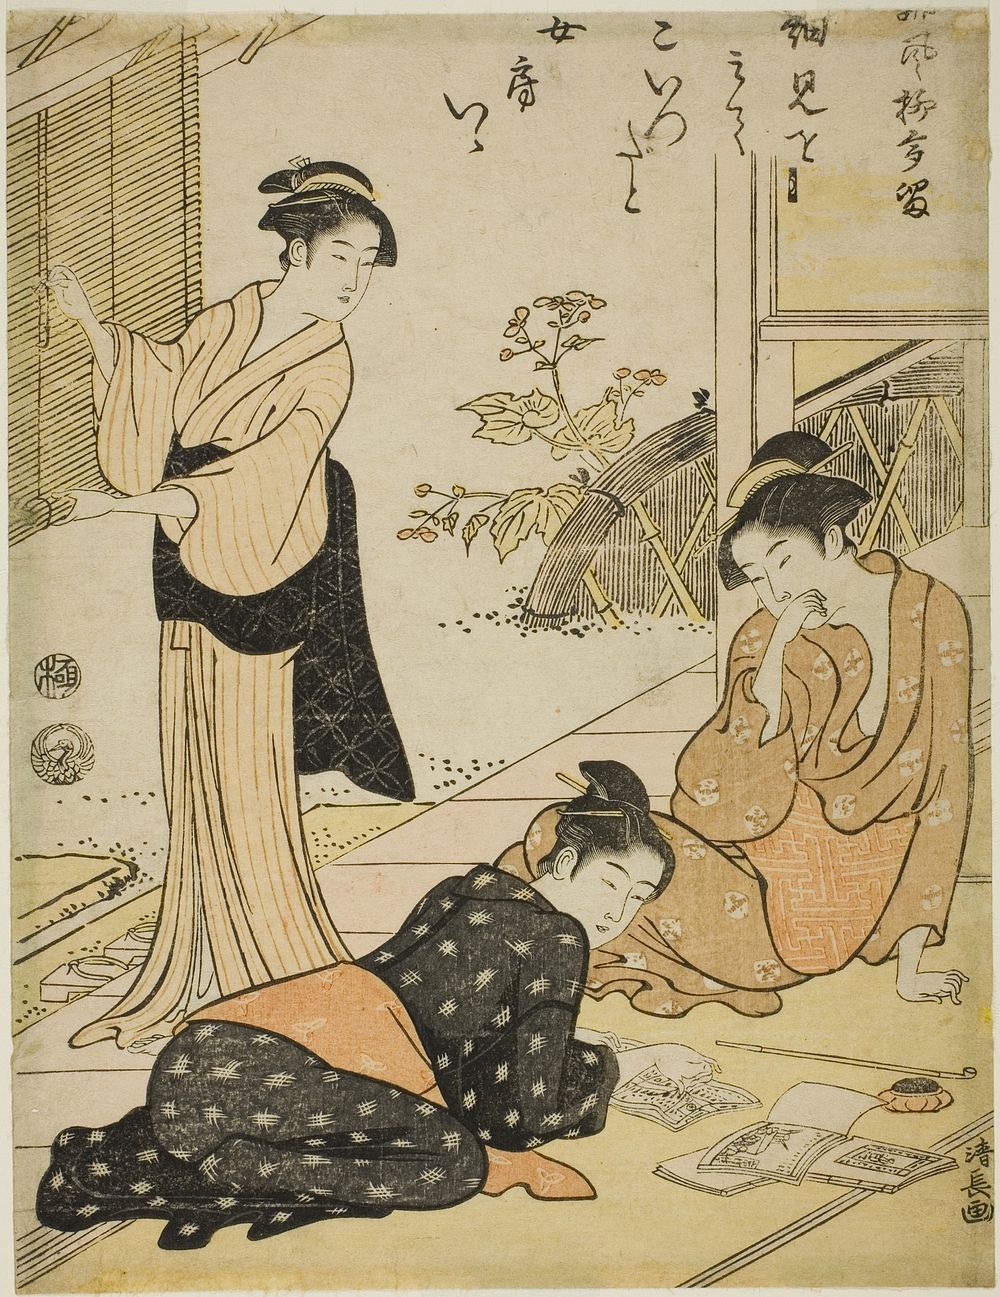 Discovering the Address of a Husband's Lover, from the series "A Collection of Humorous Poems (Haifu yanagidaru)" by Torii…